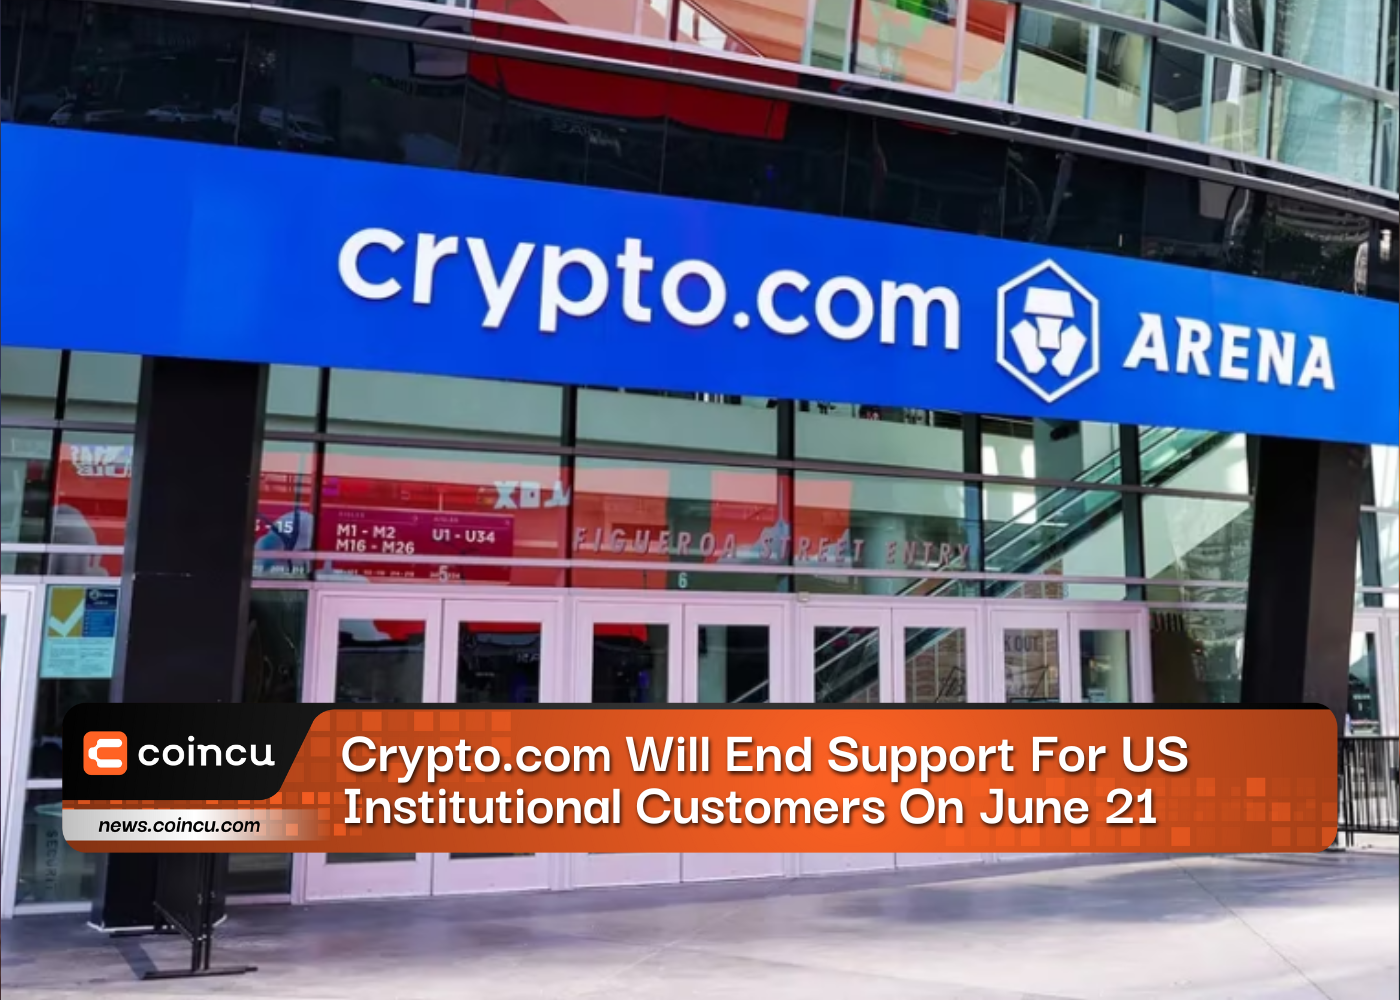 Crypto.com Will End Support For US Institutional Customers On June 21